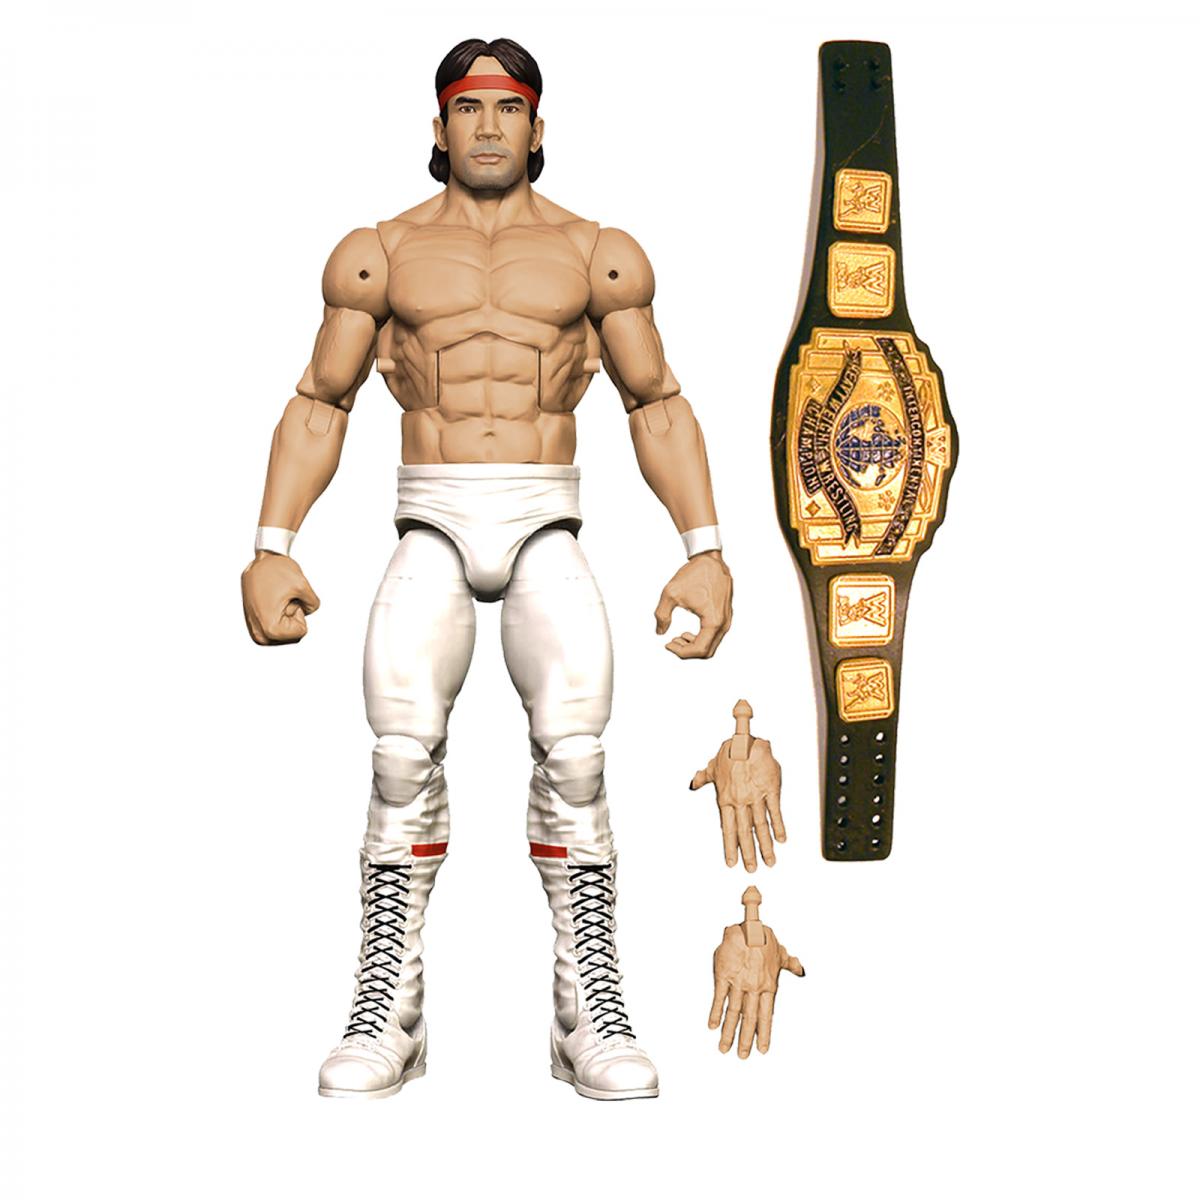 123_gwv77_fan_ricky_steamboat_wwe_2020_sdcc_reveals D5a61a36f491634dae8e8c6c023598c9